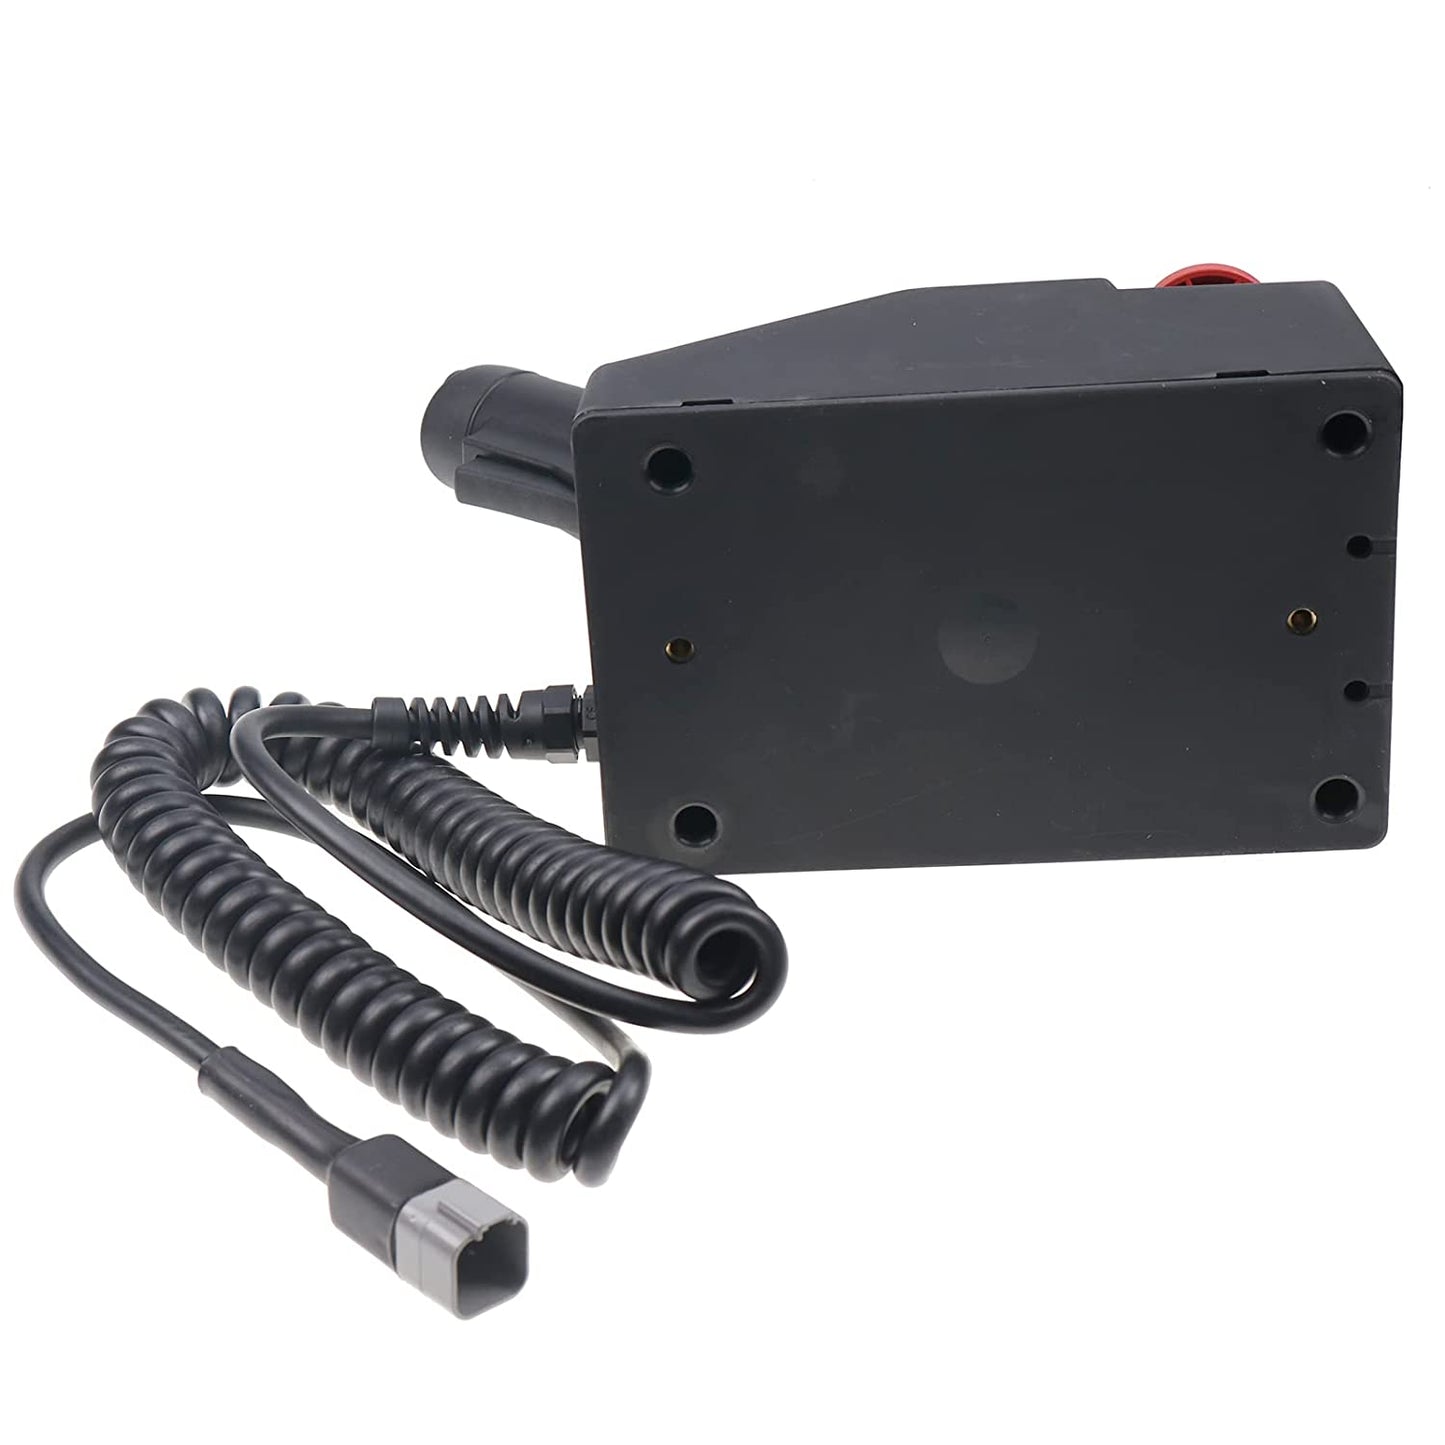 New 1256727 1256727GT Control Box Compatible with Genie Lift Gen 6 GR-12 GR-15 GR-20 GRC-12 GS-1530 GS-1532 GS-1930 GS-1932 GS-2032 GS-2046 GS-2632 GS-2646 GS-3246 GS-4047